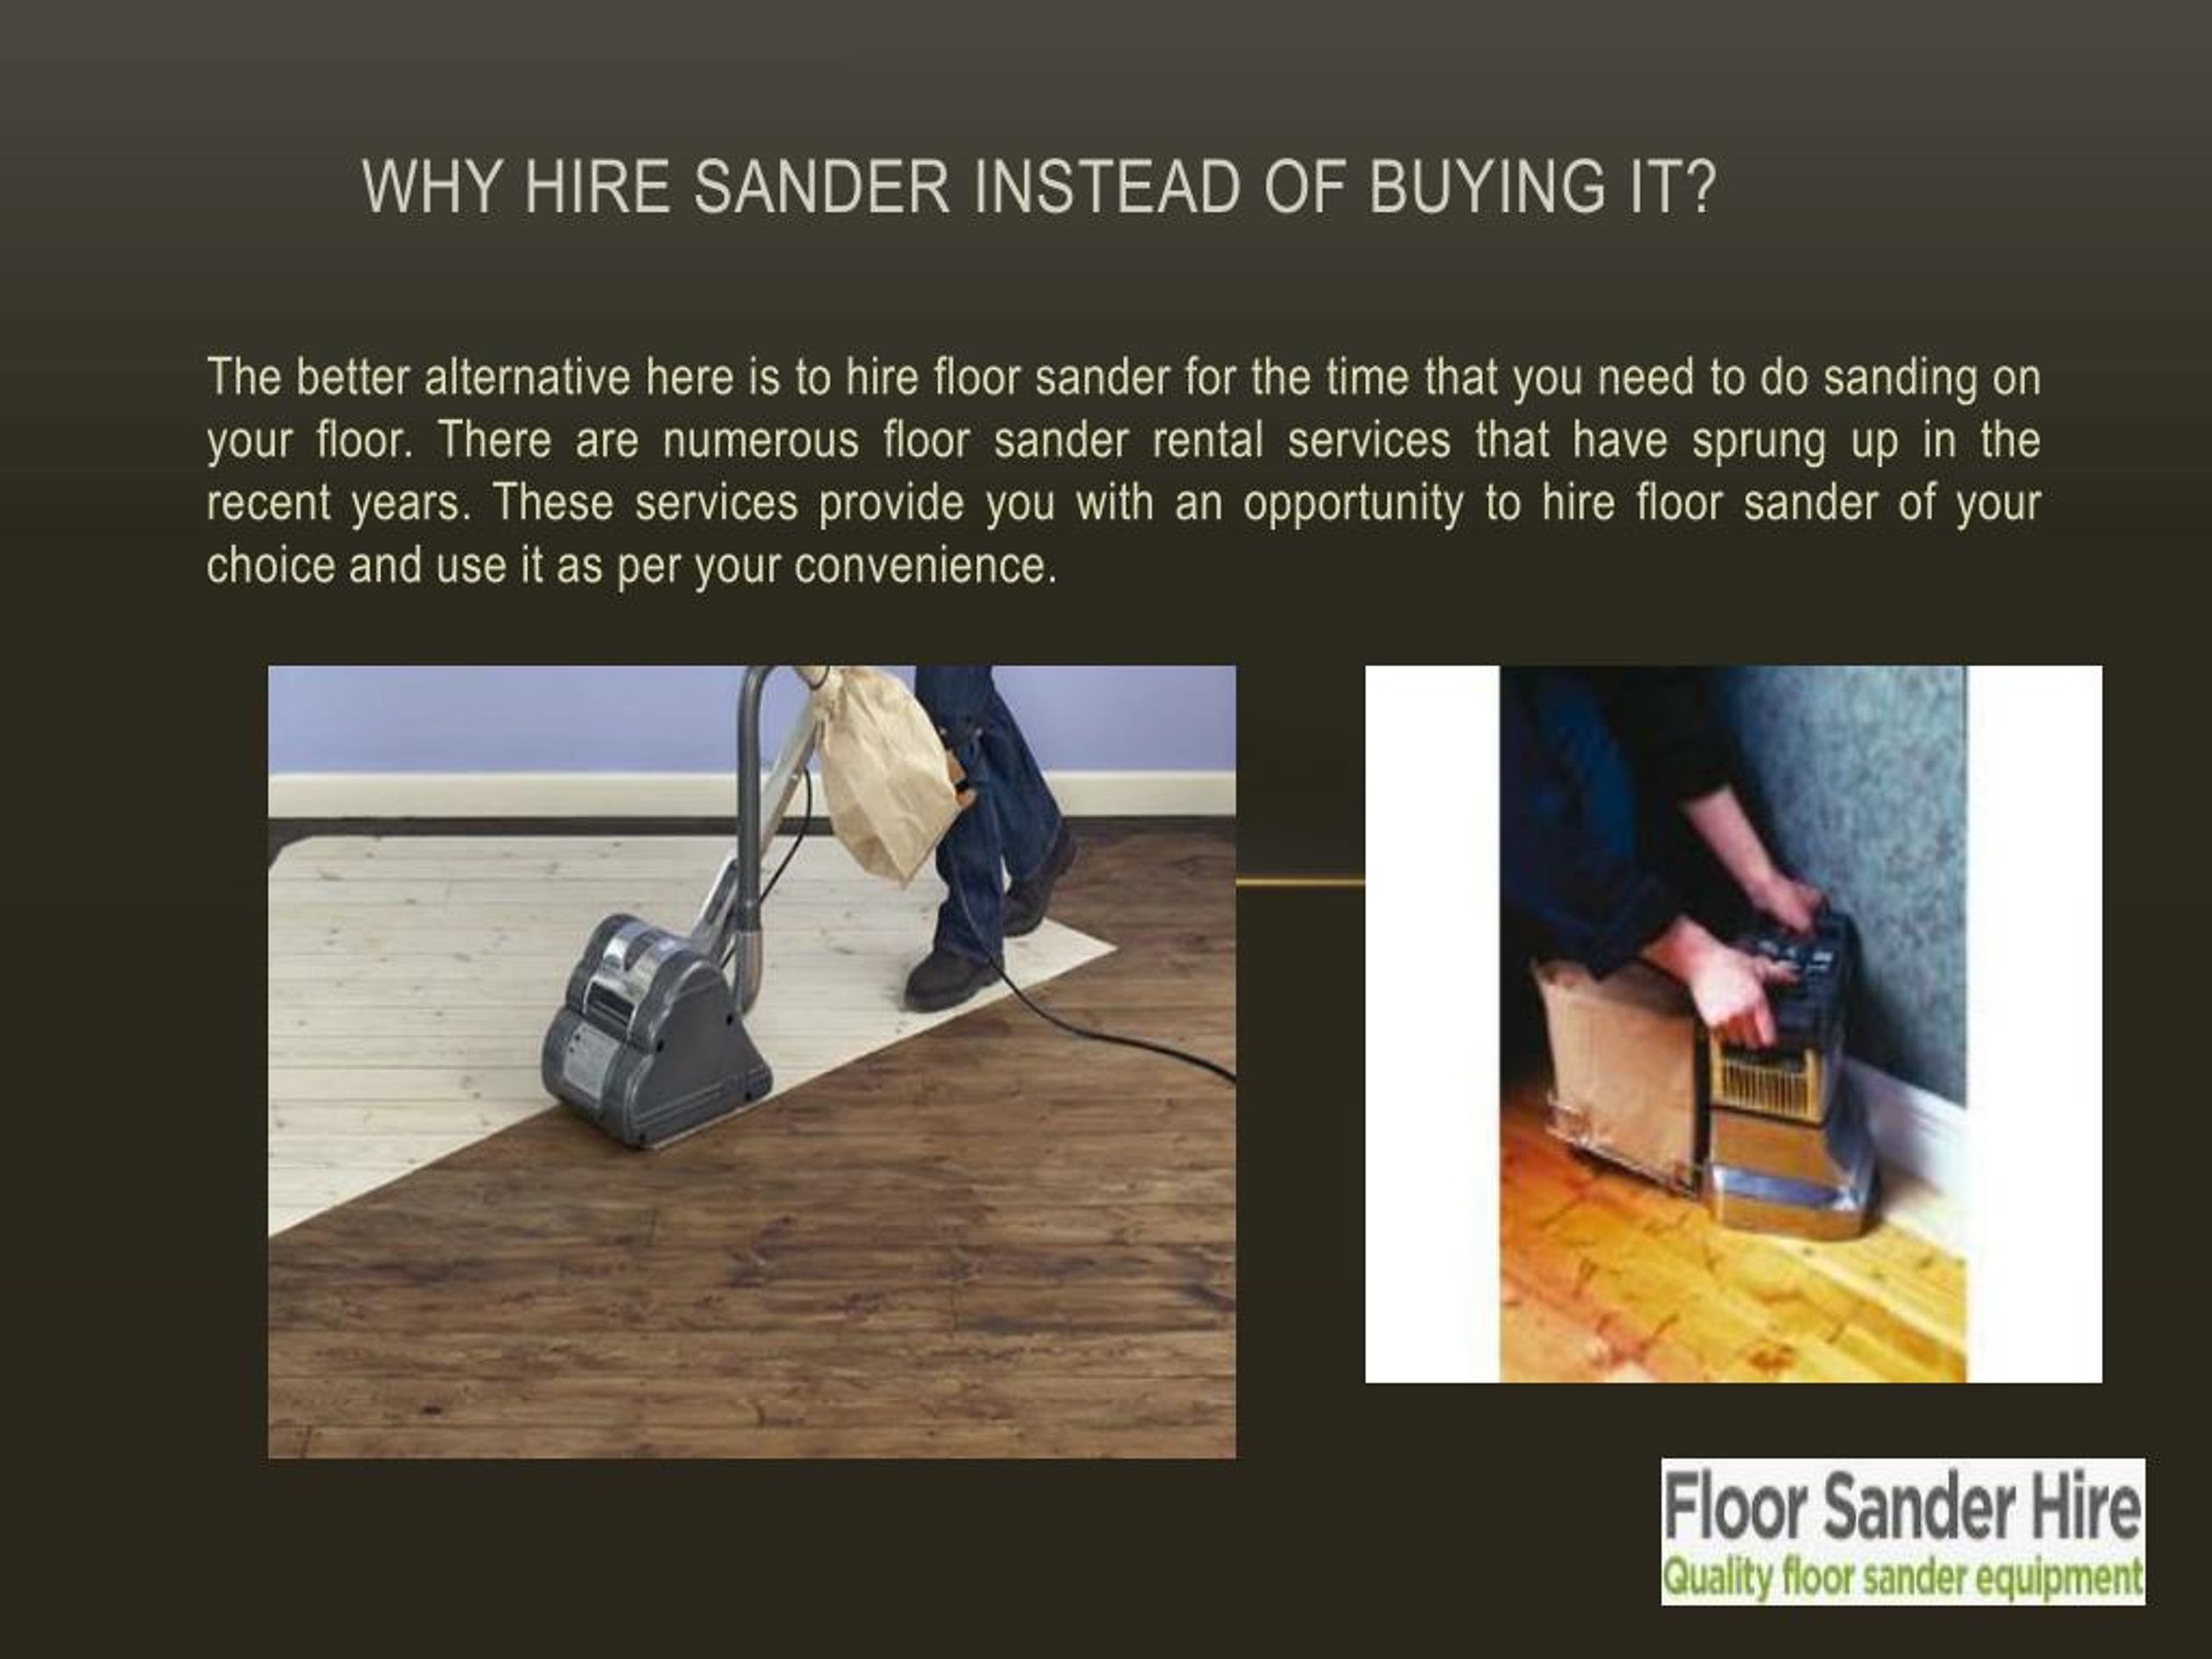 Ppt Why Hire Sander Instead Of Buying It Powerpoint